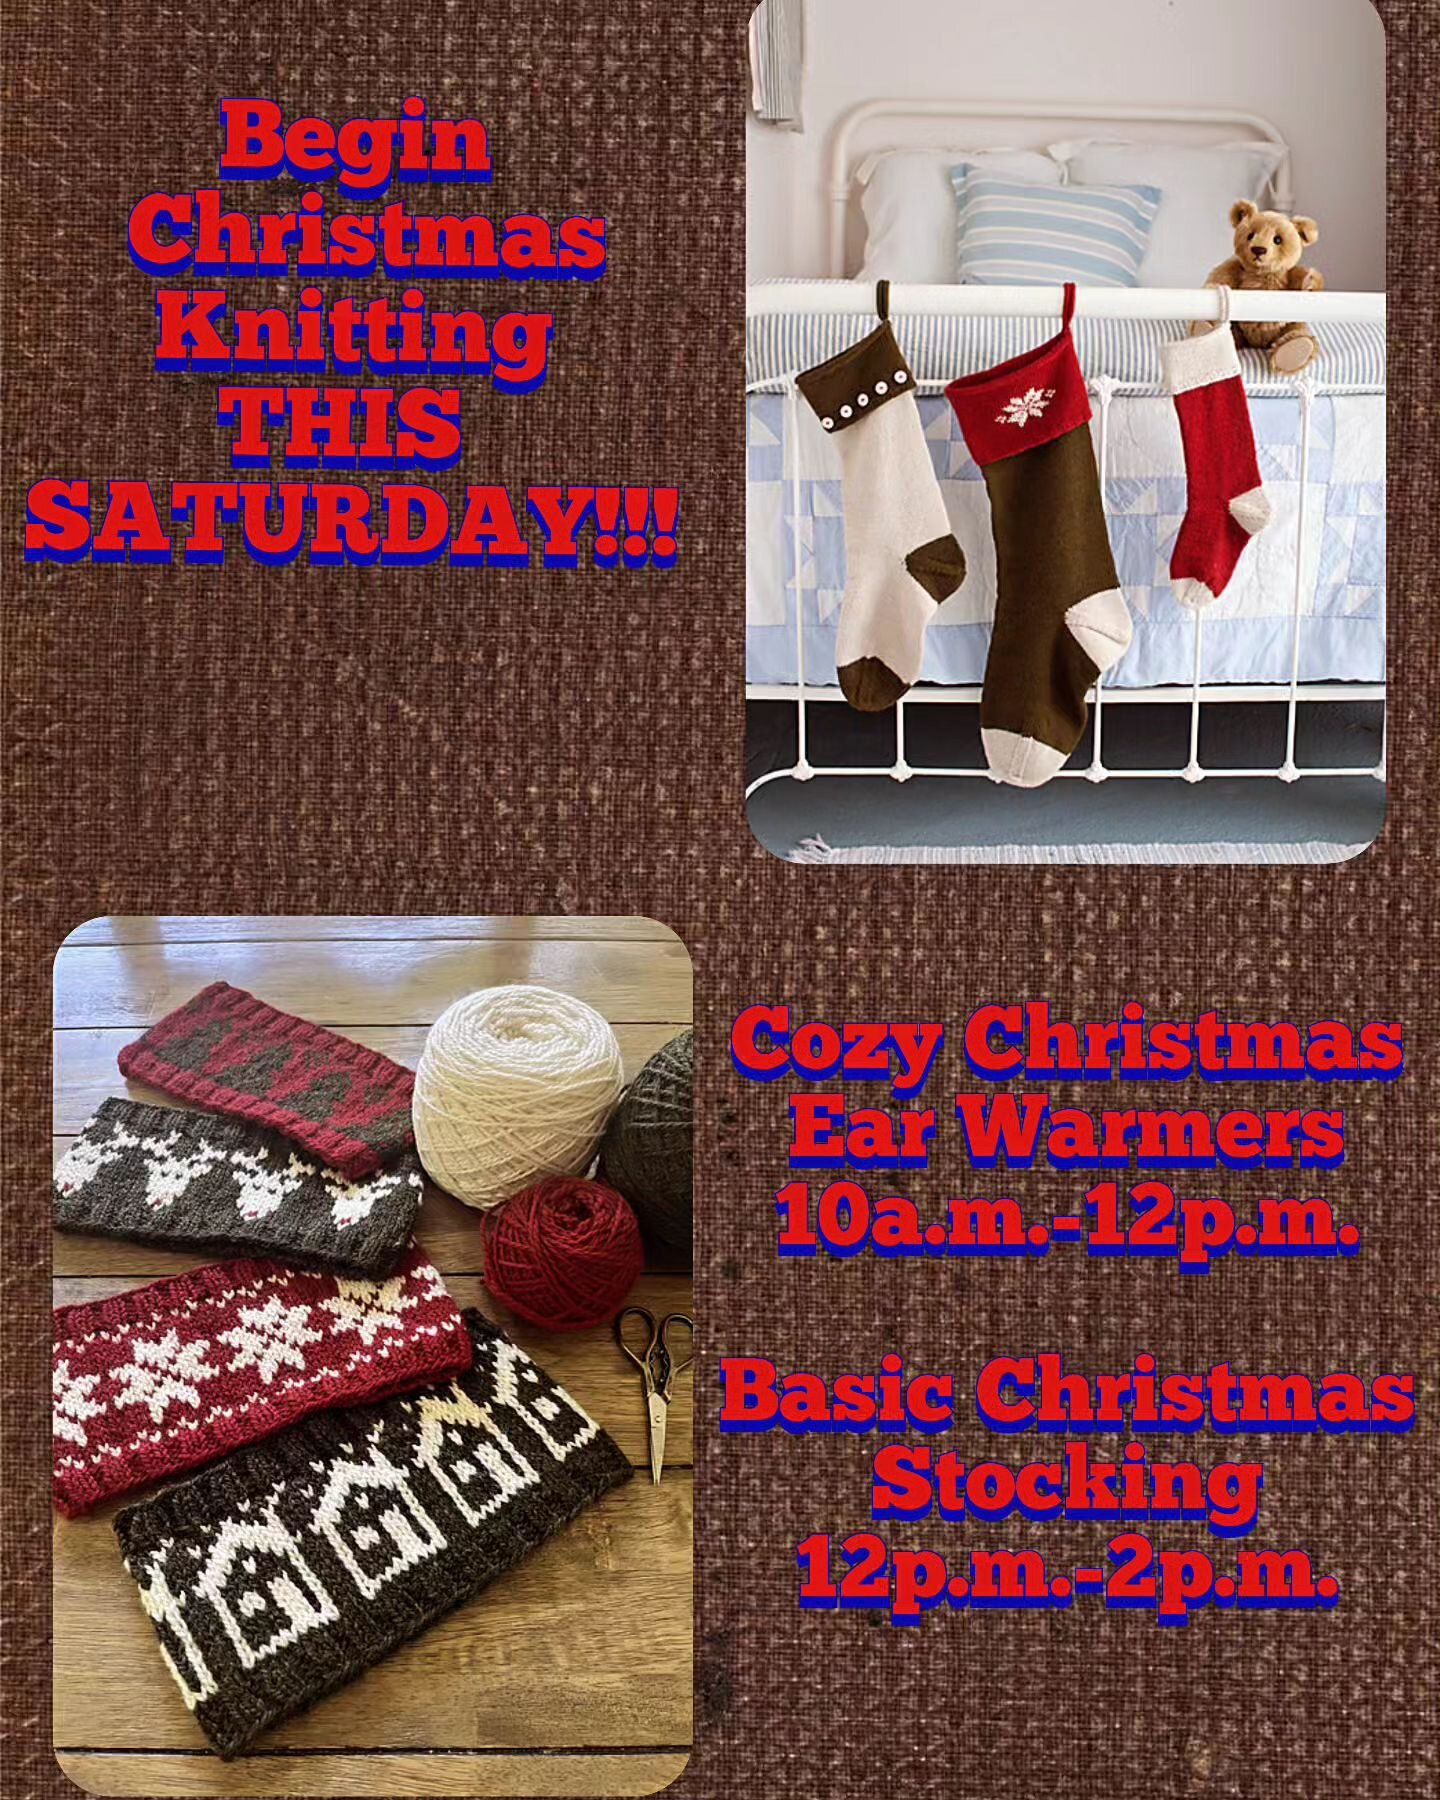 We are in the Christmas mood this Saturday at the shop. We are starting two different classes. You can learn how to make a wintery headband. It is a wonderful beginner colourwork project. There are 4 different motifs to choose from. You can also make